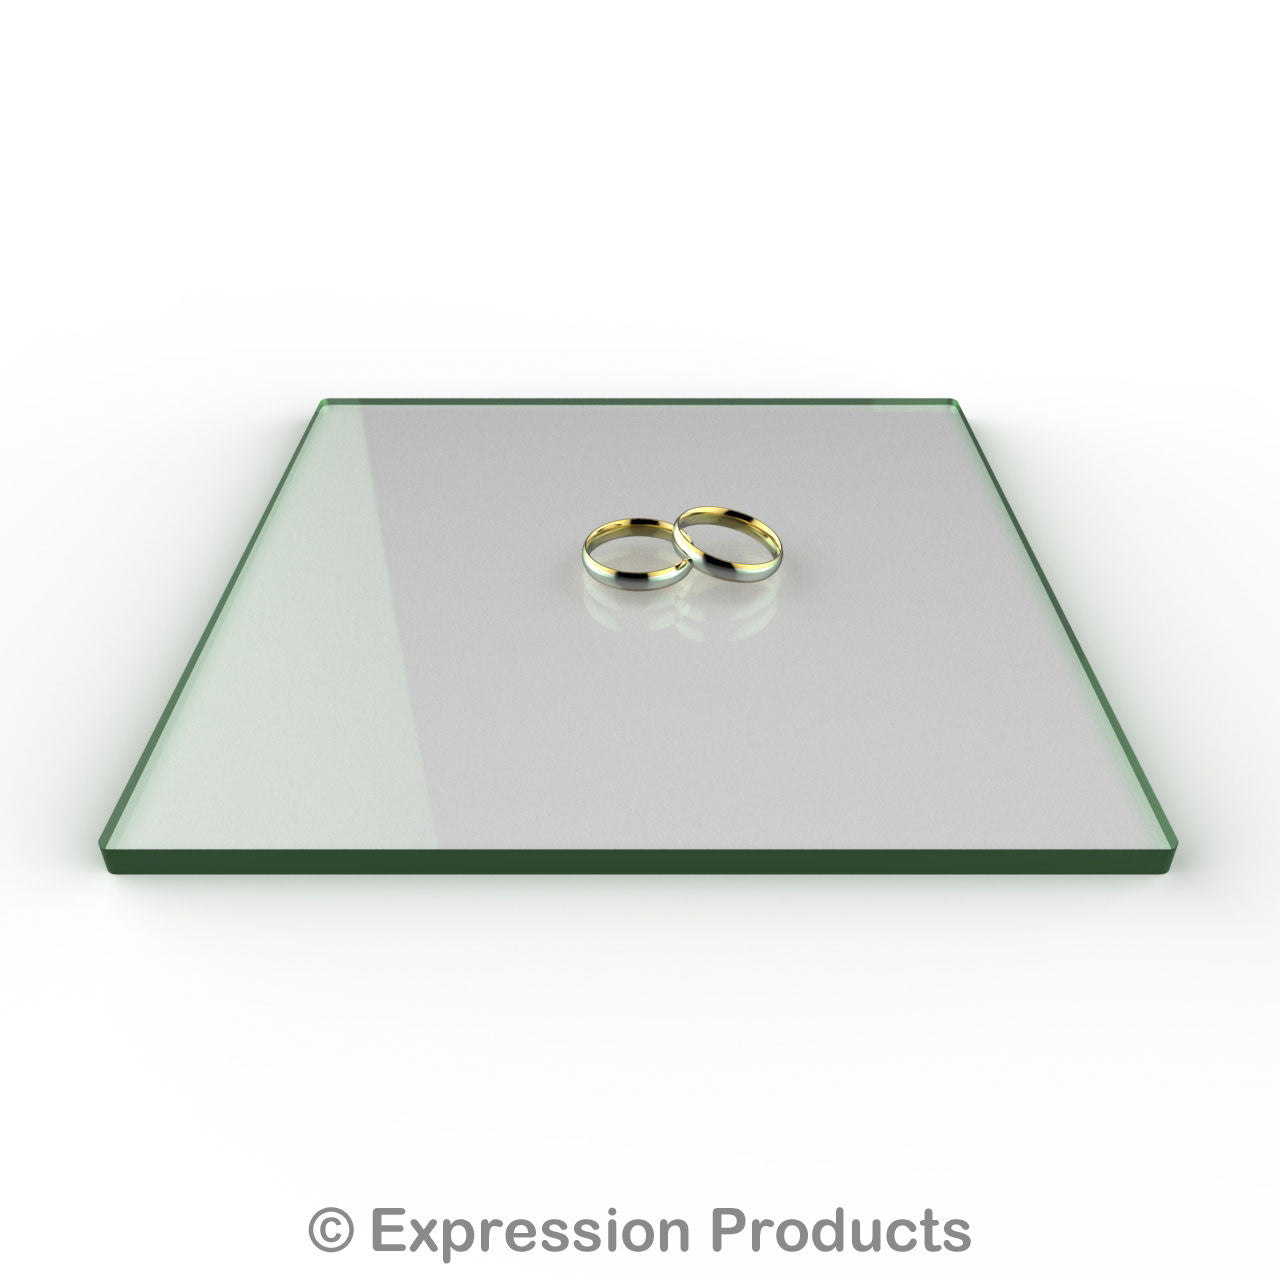 Square Glass Effect Acrylic Cake Display Board 4" - 18" - Expression Products Ltd